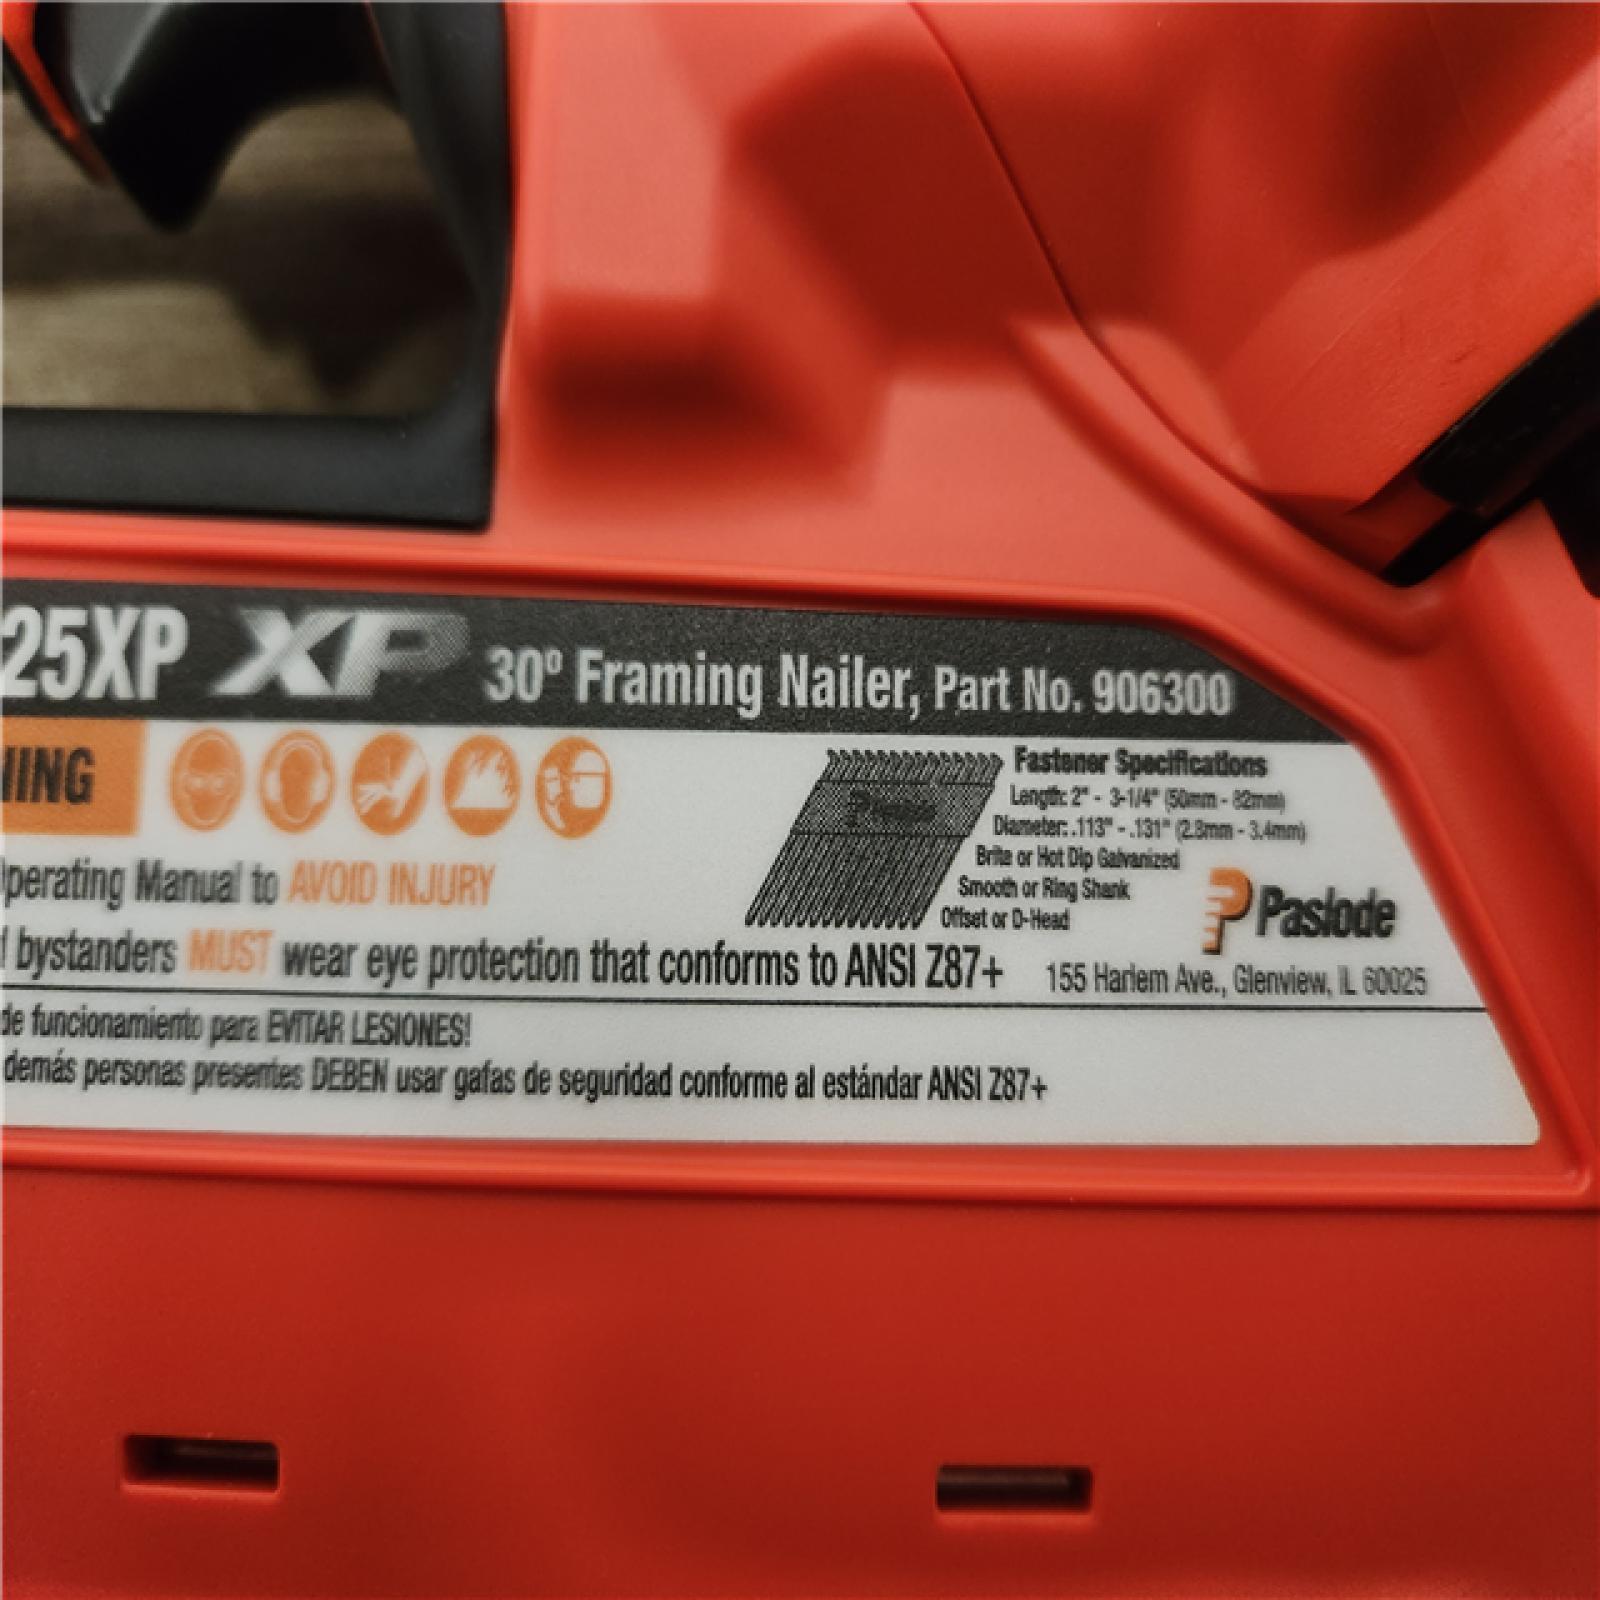 Phoenix Location Appears NEW Paslode CFN325XP Lithium-Ion Battery 30° Cordless Framing Nailer